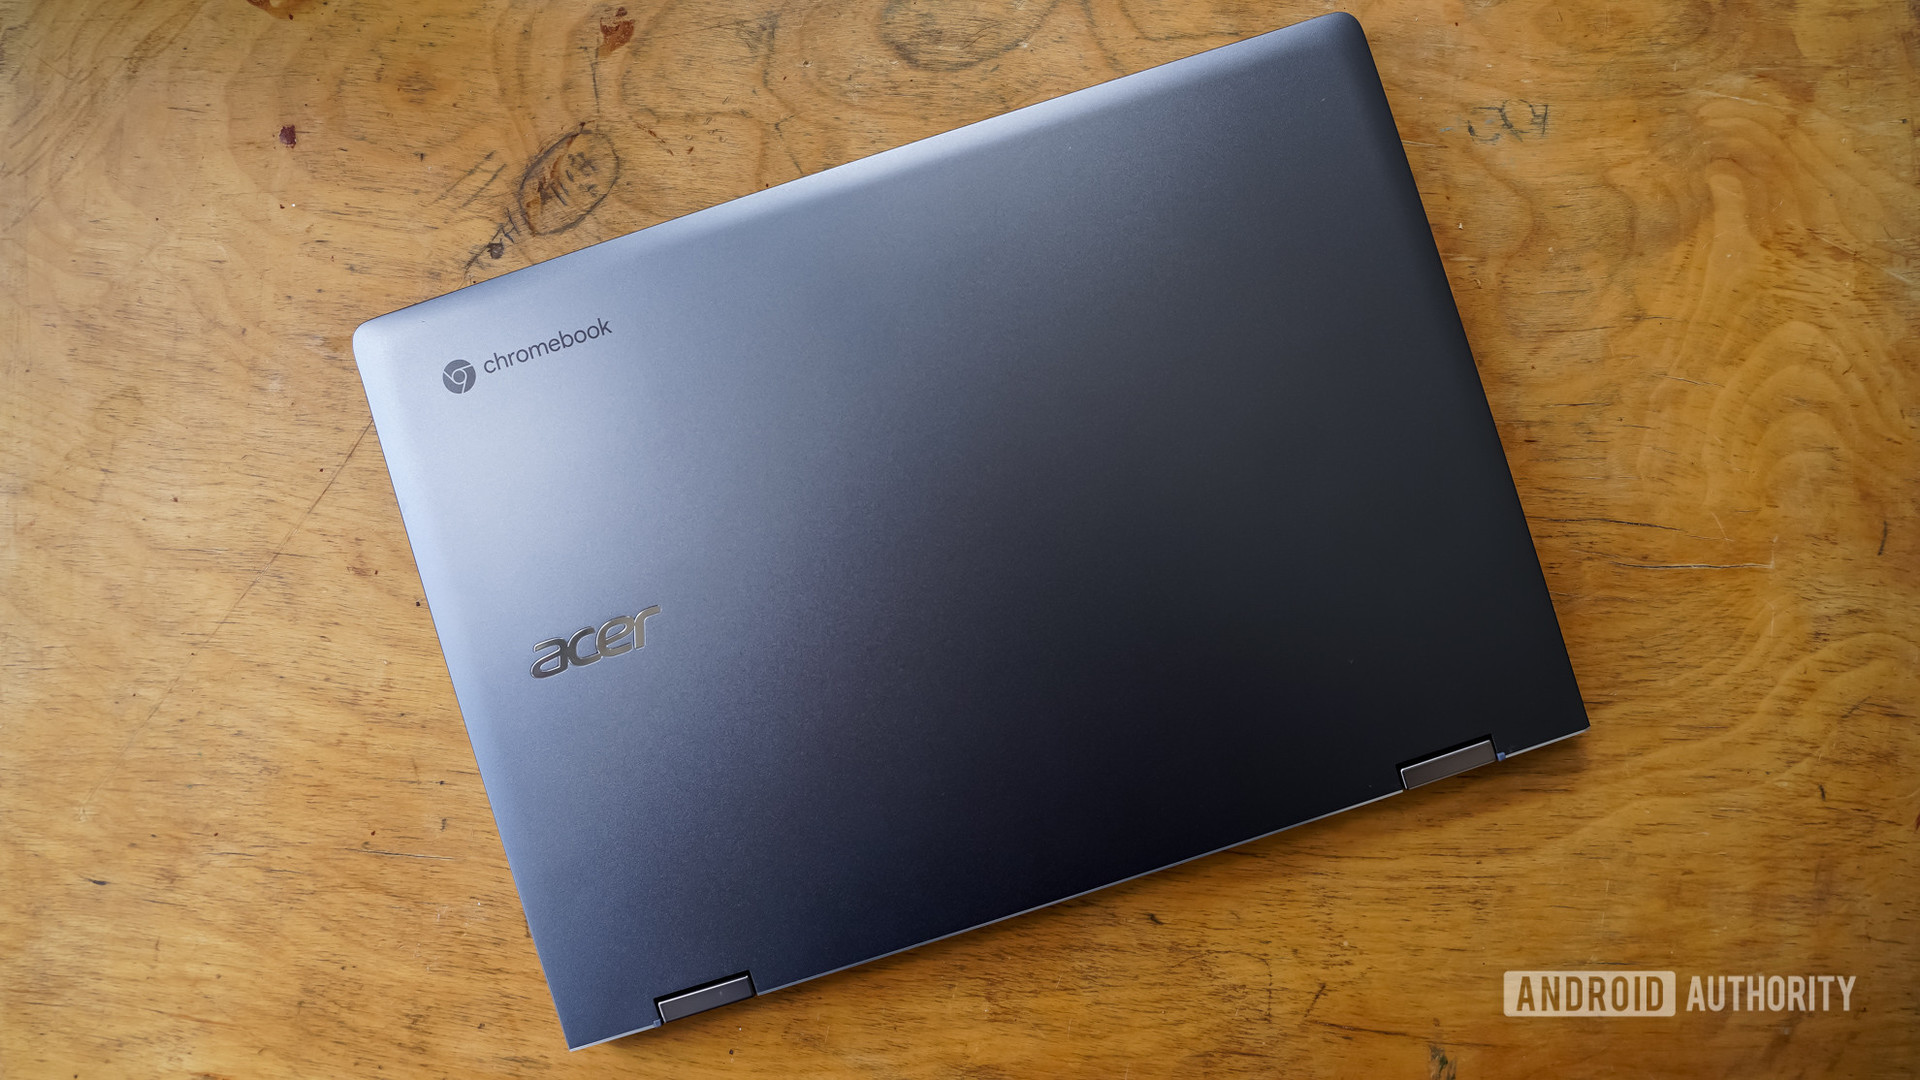 You can now use your Chromebook to quickly access your phone’s pictures